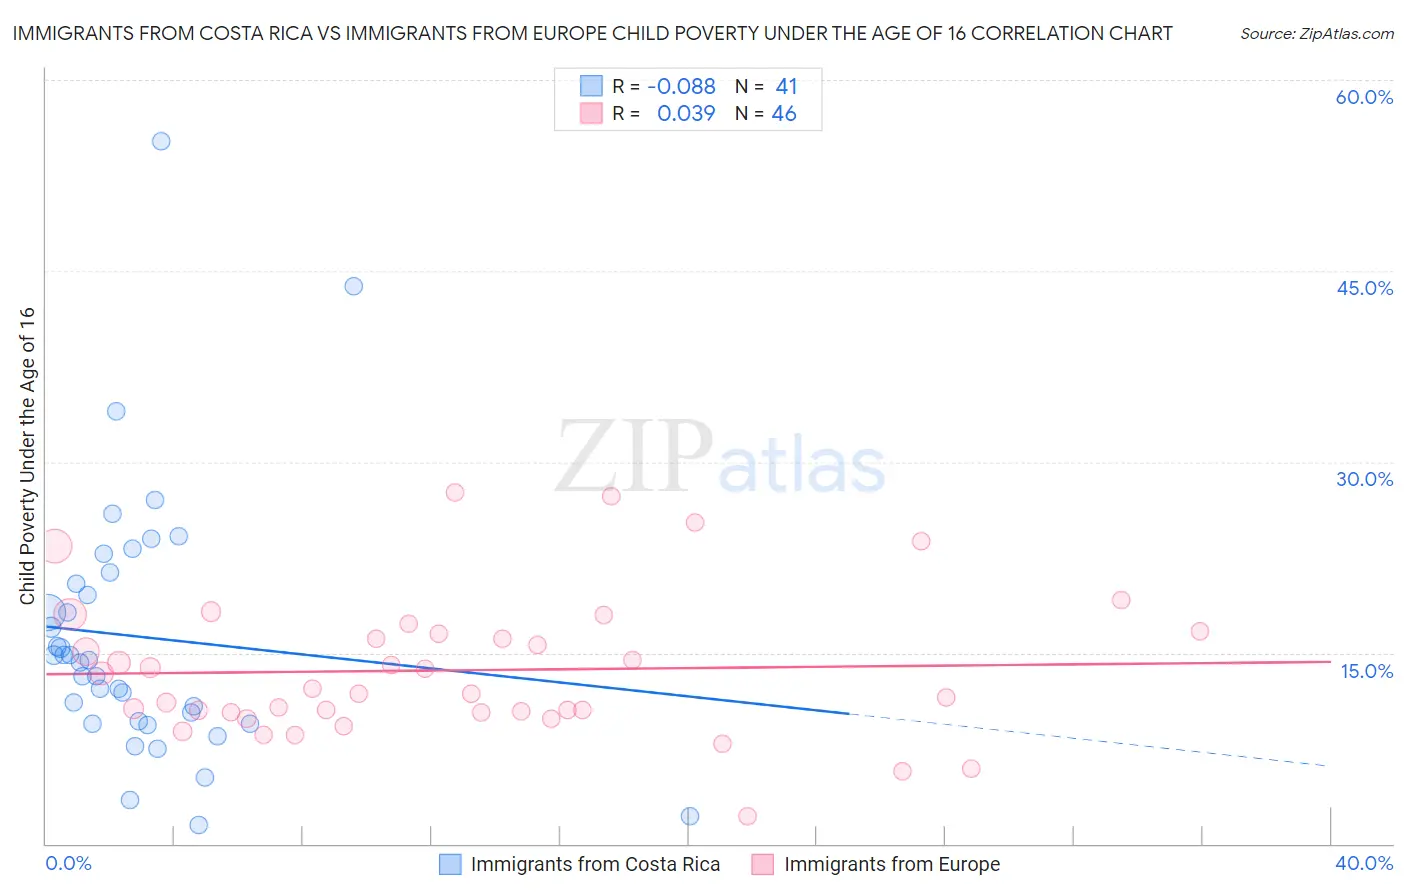 Immigrants from Costa Rica vs Immigrants from Europe Child Poverty Under the Age of 16